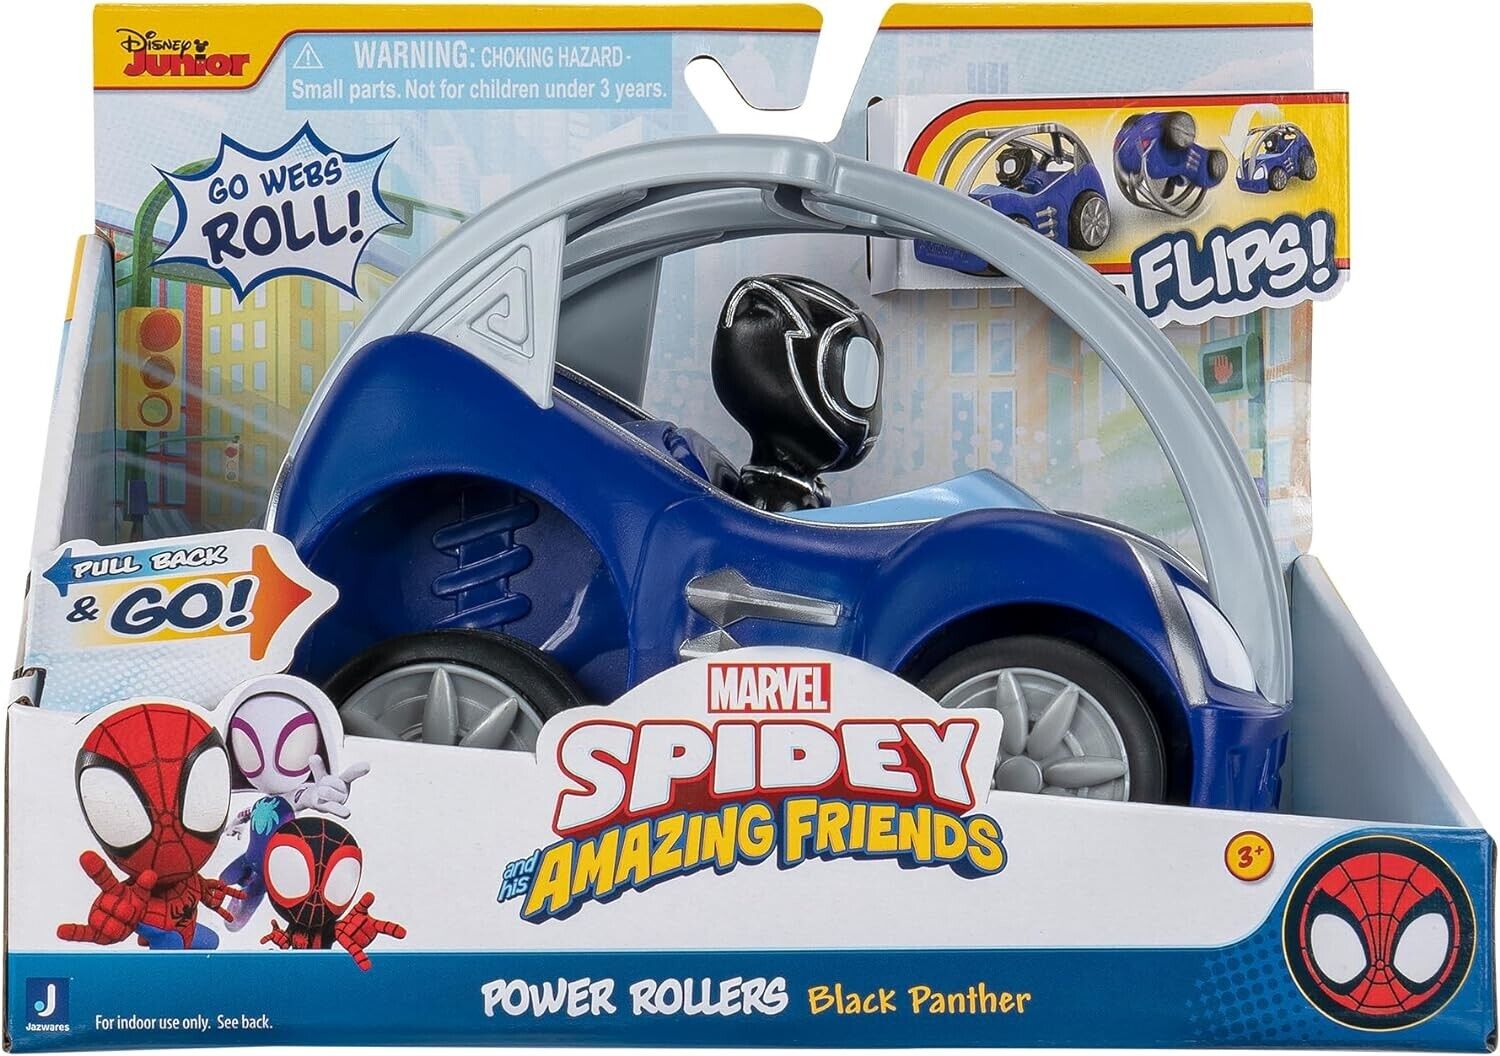 Marvel's Spidey and his Amazing Friends SNF0199 Power Rollers-Black Panther 6-In